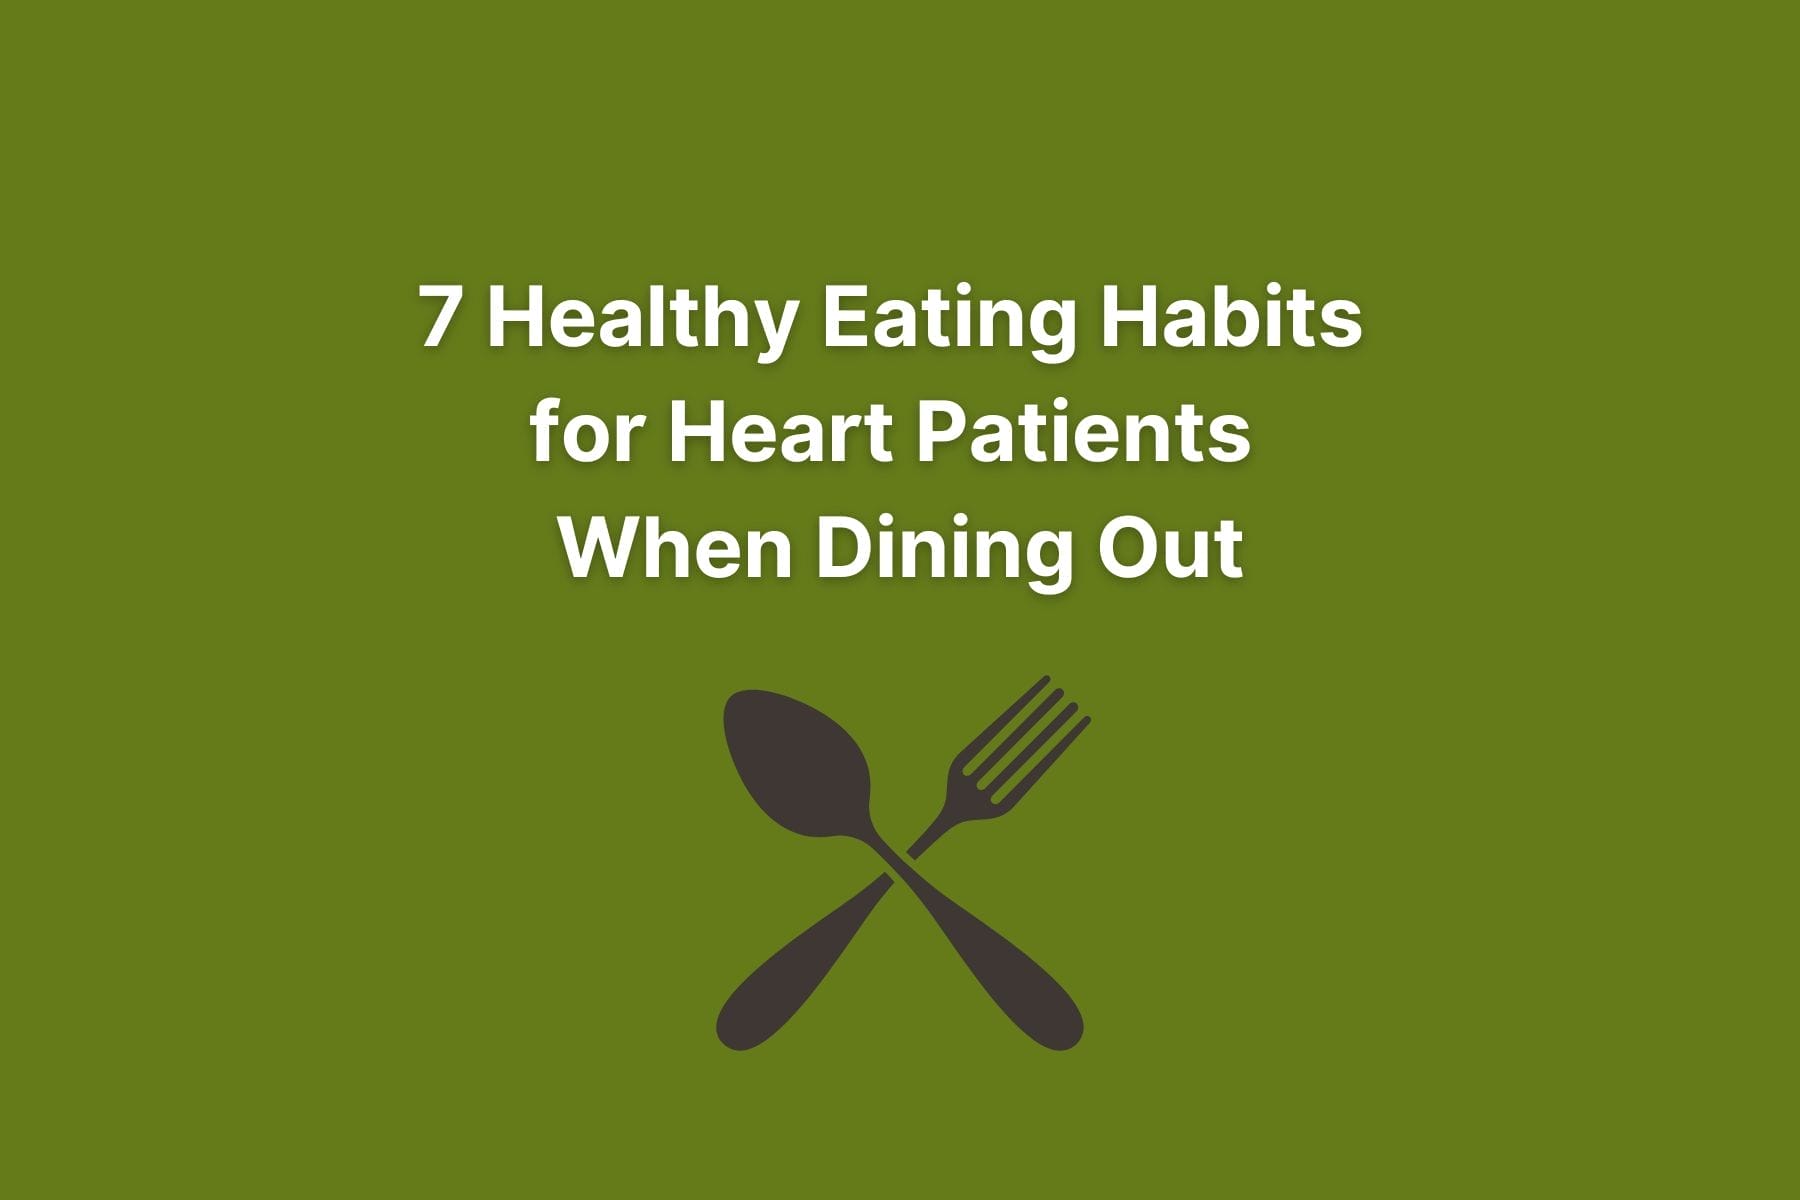 Blog article title (7 healthy eating habits for heart patients when dining out) in white font on green background with graphic of spoon and fork underneath.